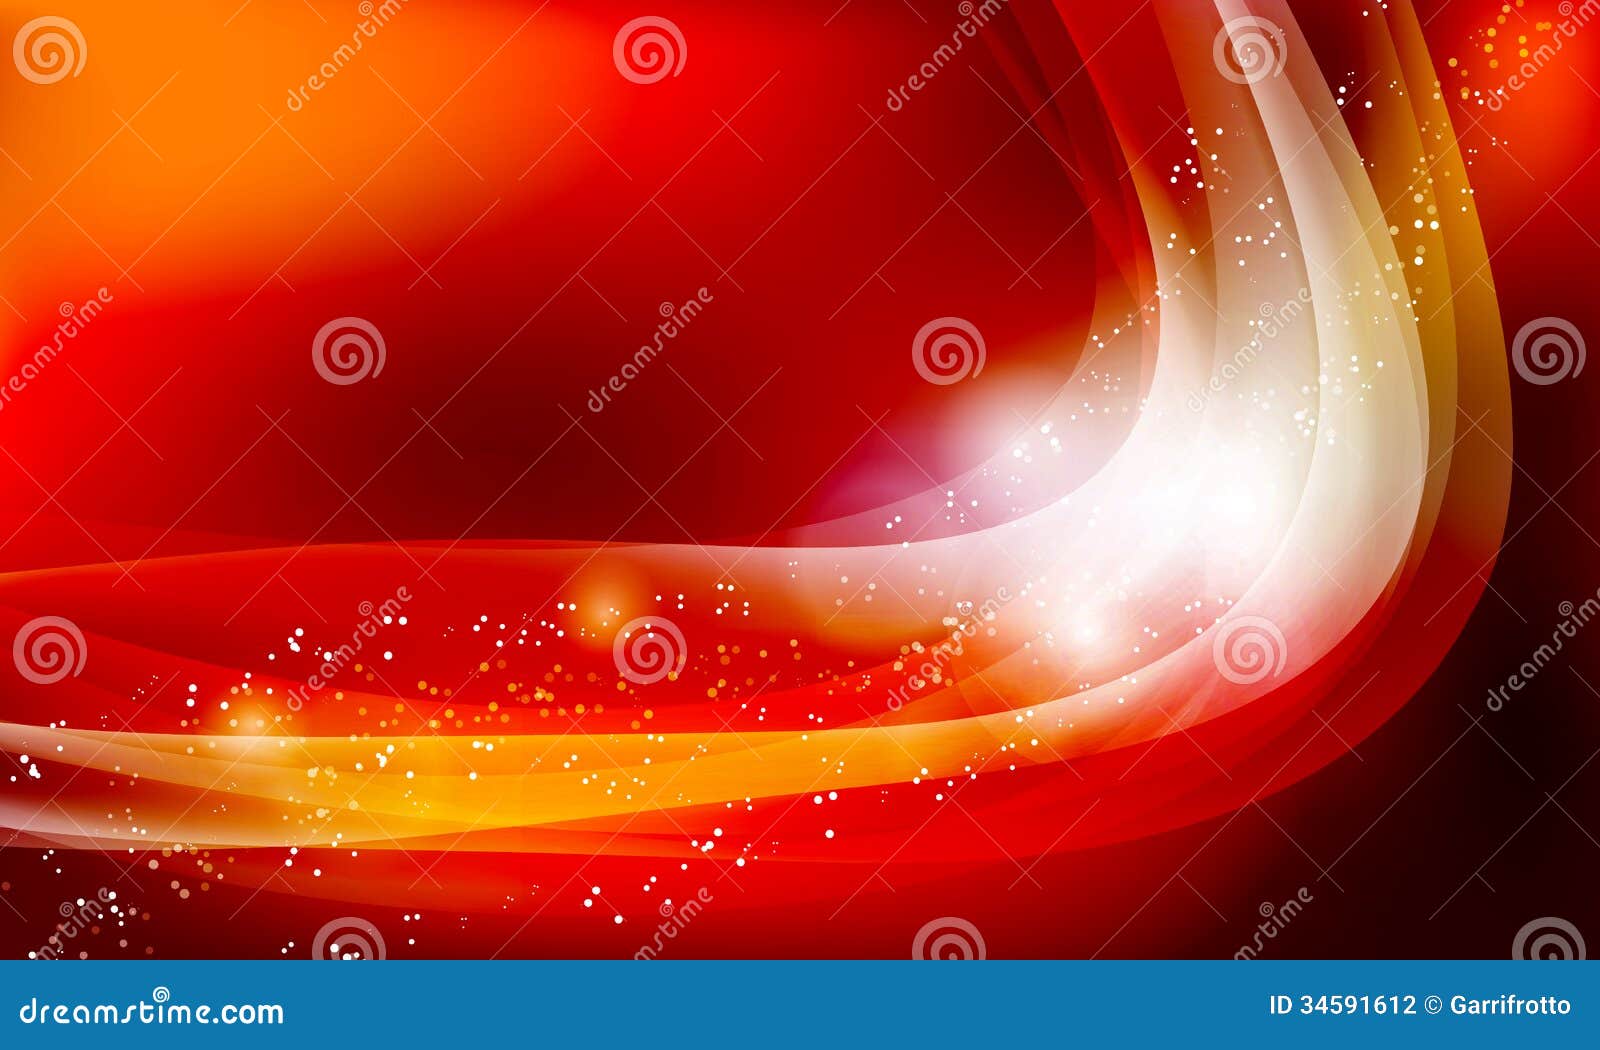 Red abstract background stock vector. Illustration of digital - 34591612